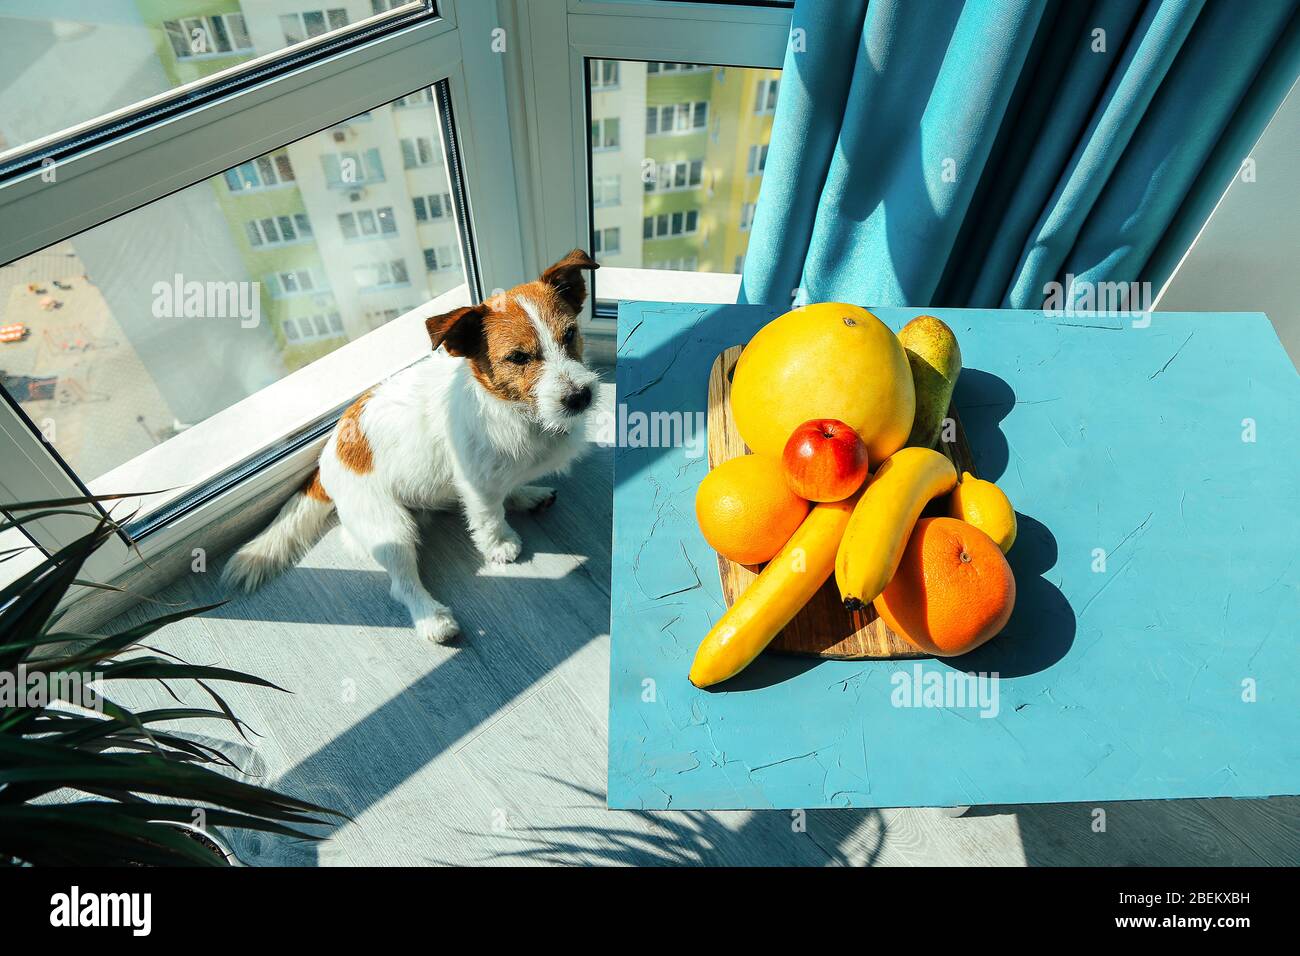 Jack Russell dog with fruits on the table. Food Photography Stock Photo